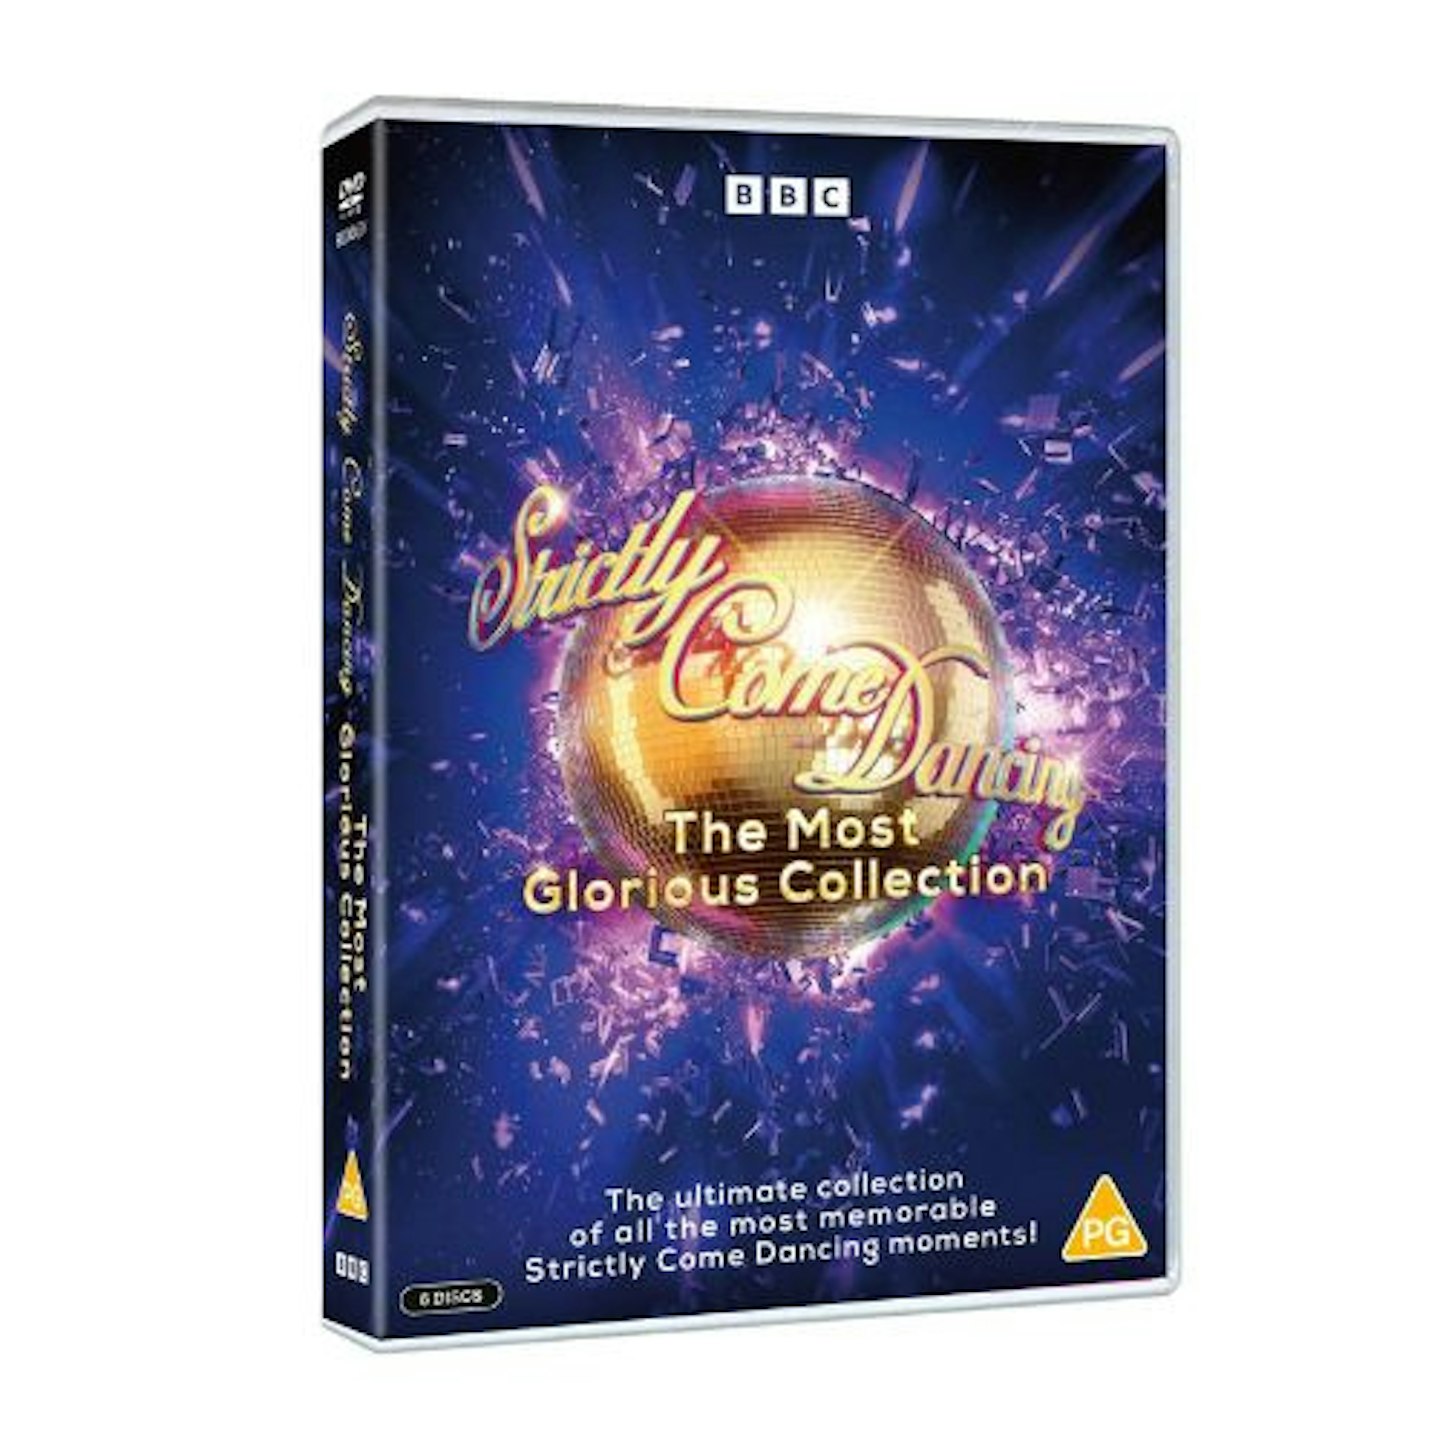 Strictly Come Dancing: The Most Glorious Collection